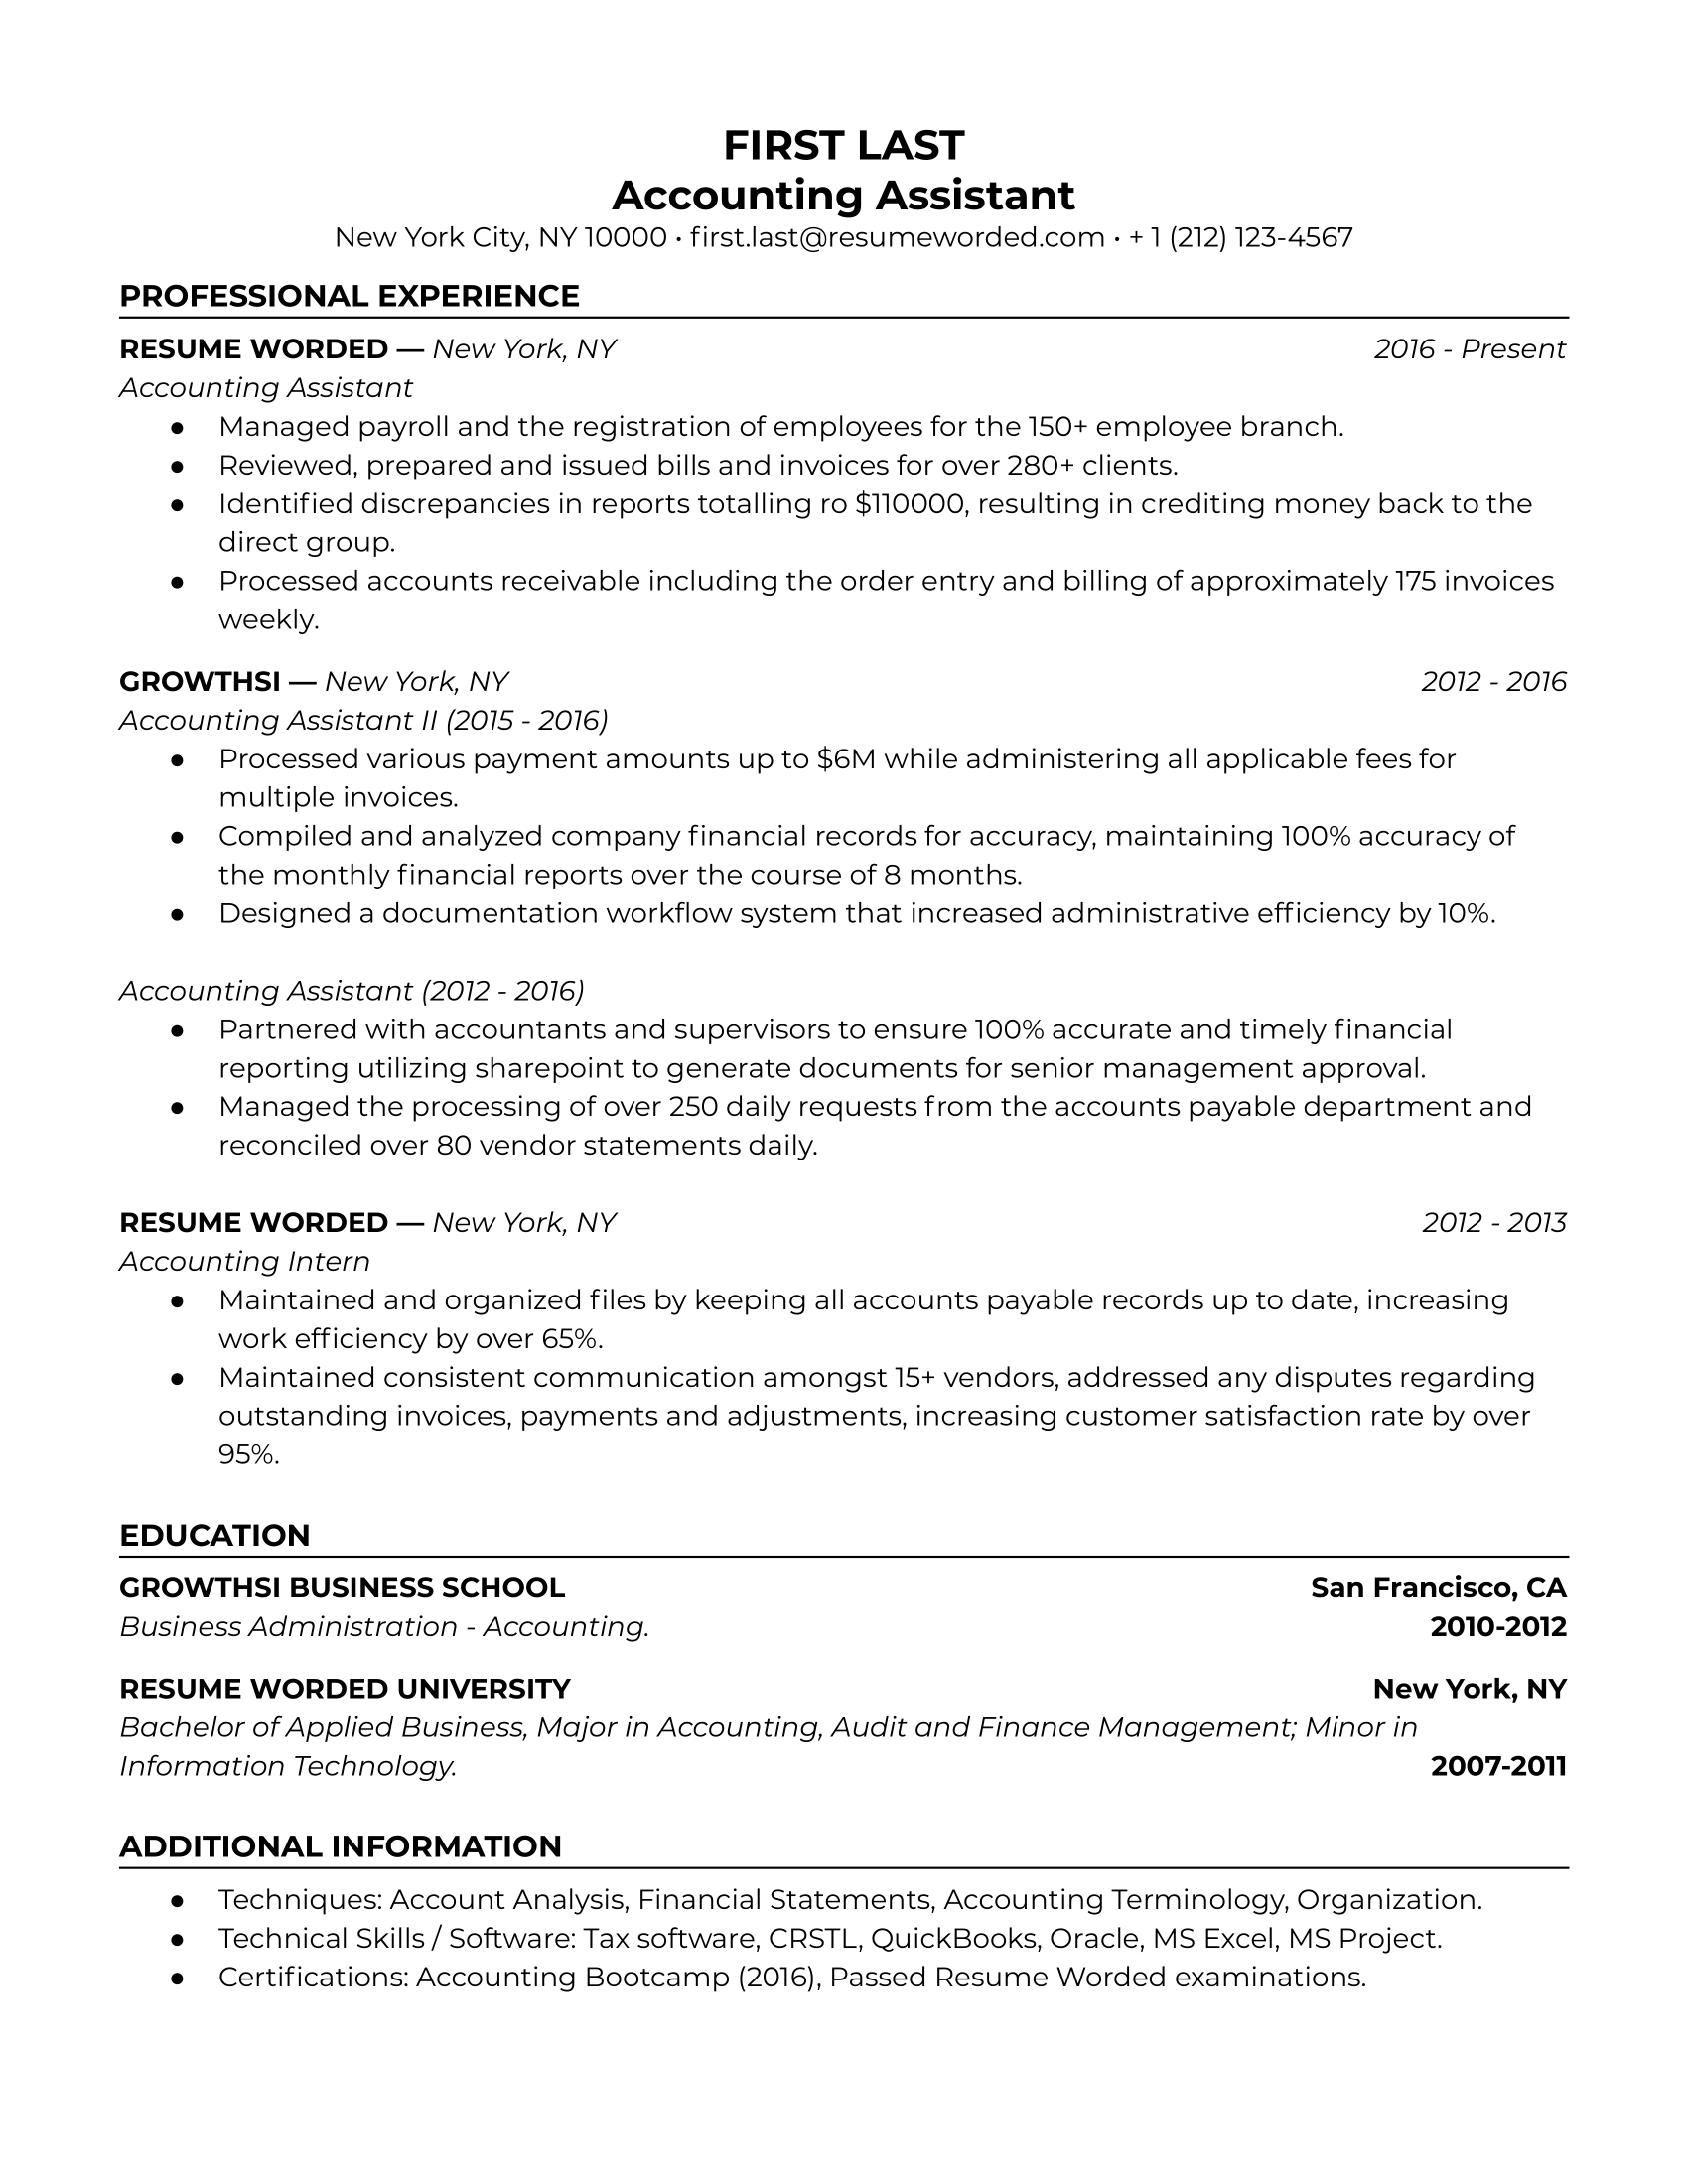 A well-crafted resume for an Accounting Assistant role, highlighting specific software skills and quantifiable achievements.